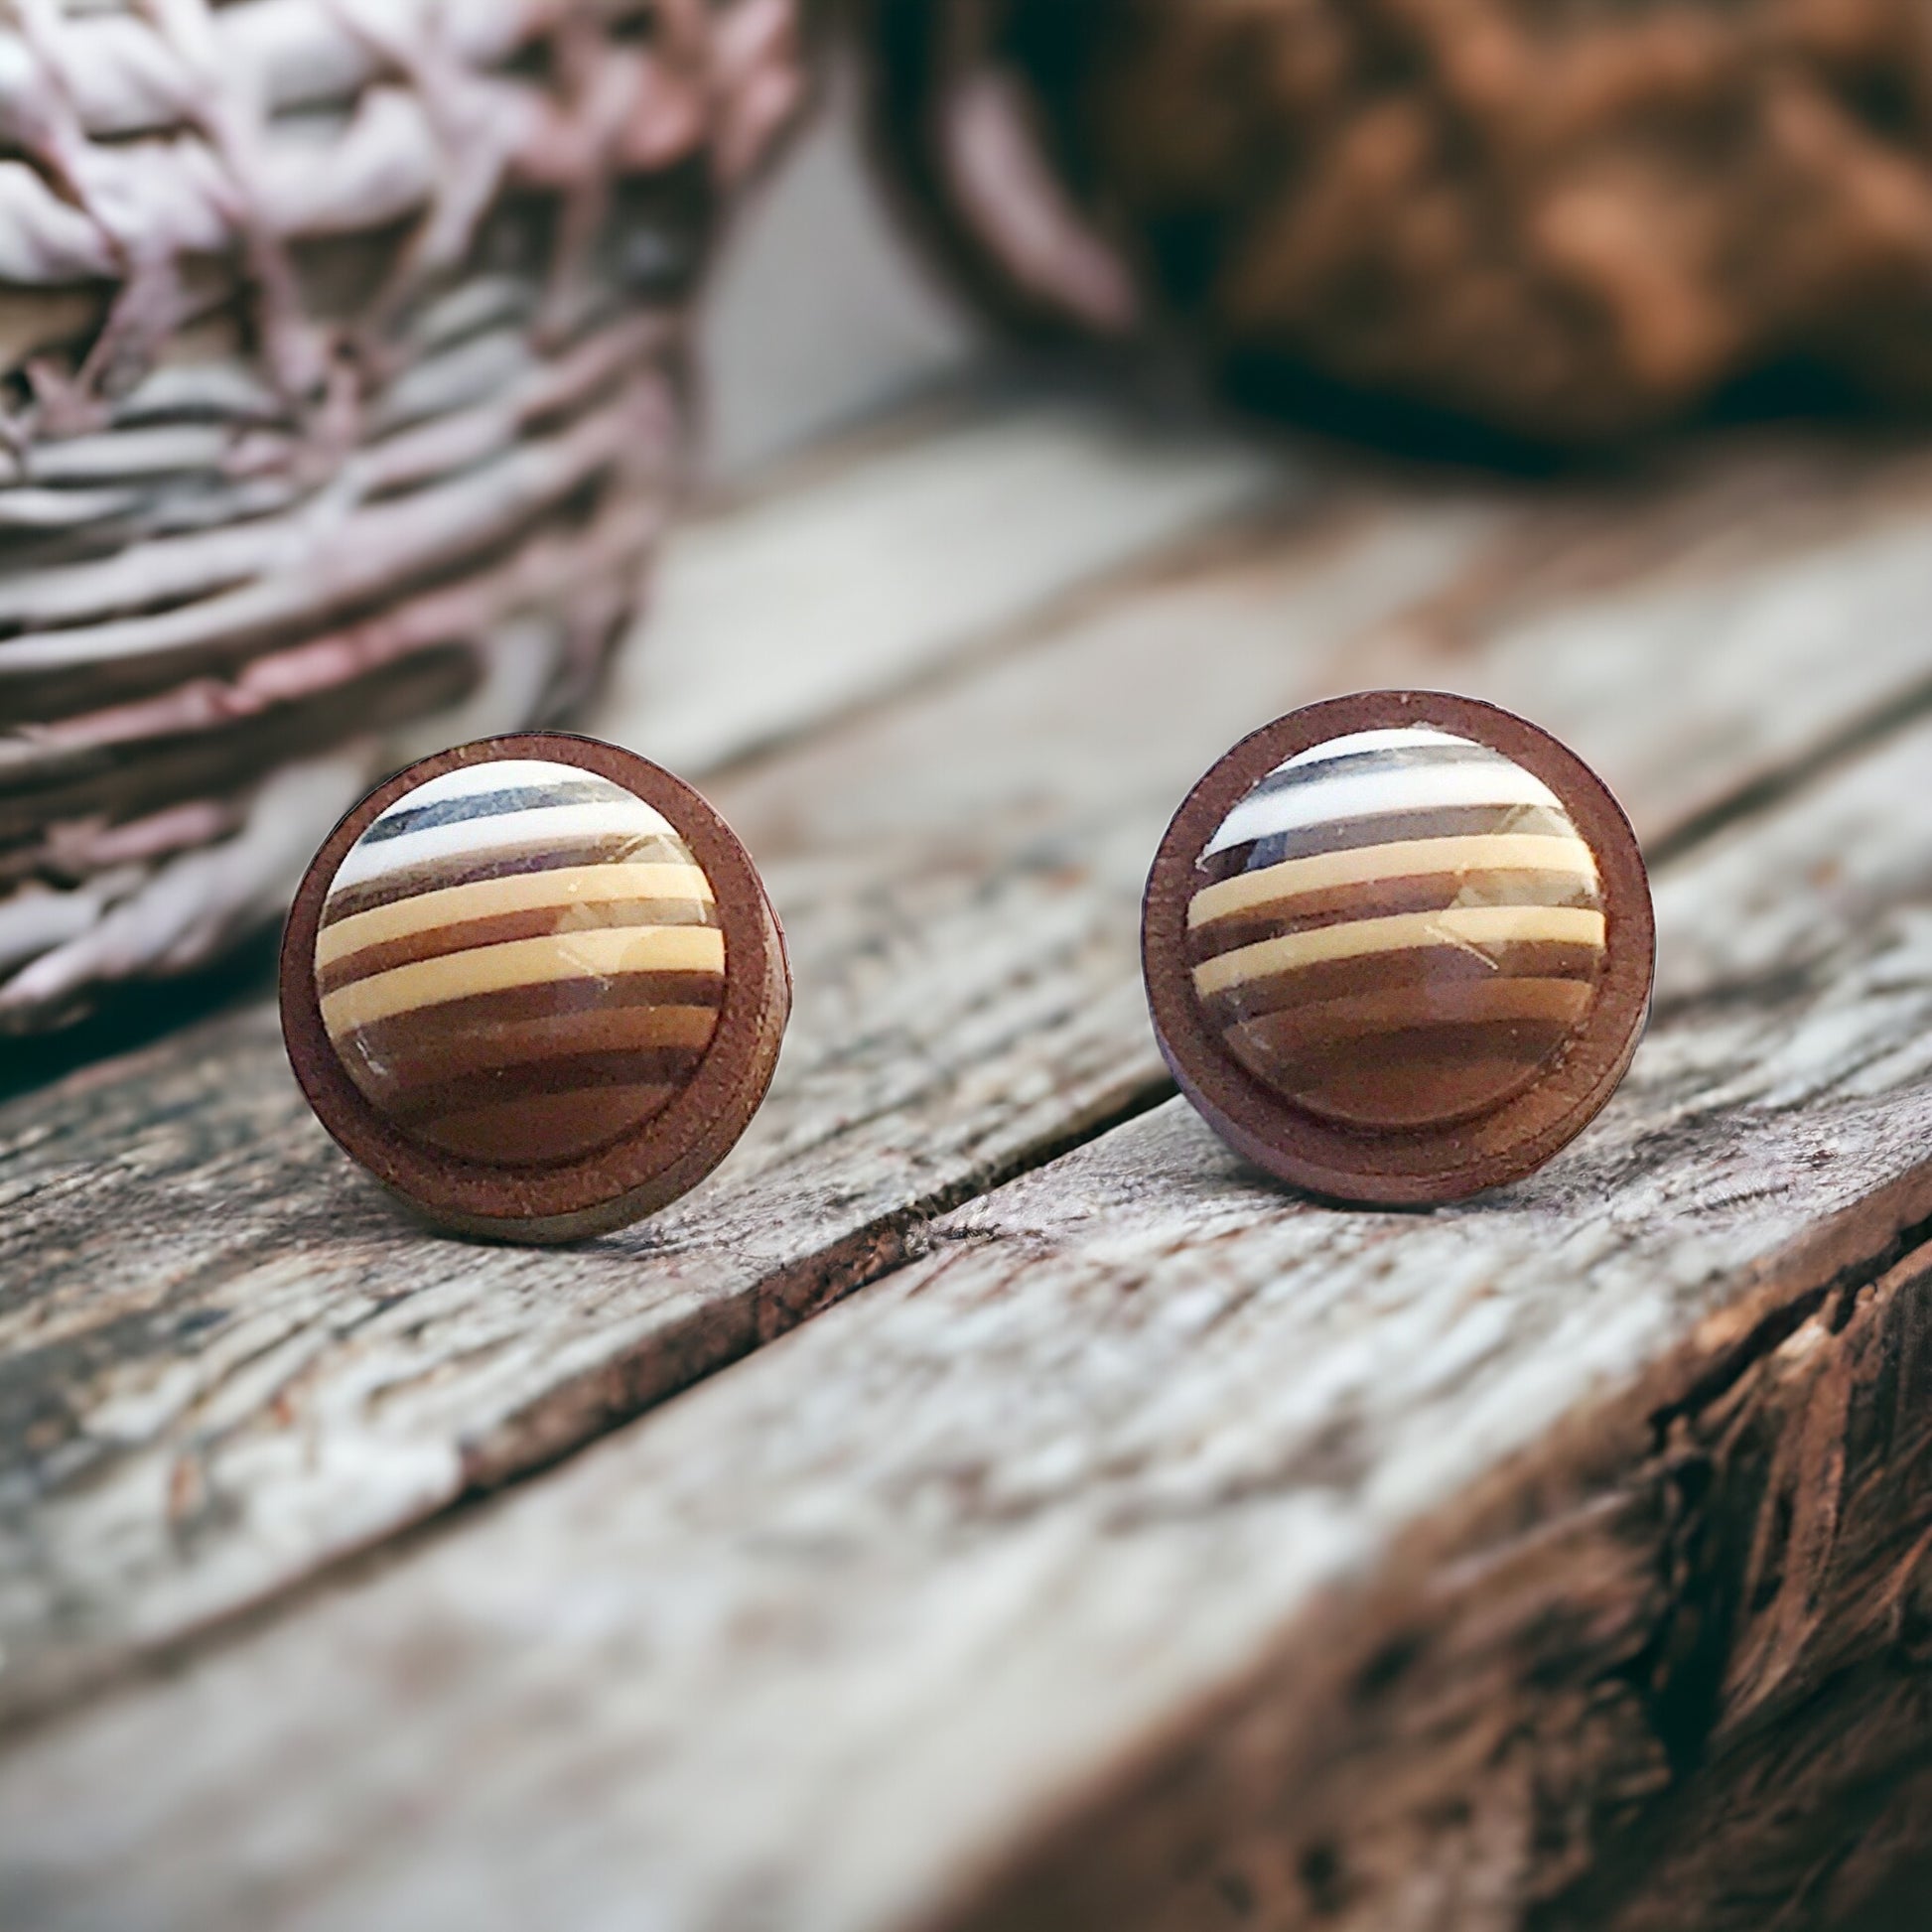 Brown Striped Earrings - Neutral Minimalist Studs with Natural Wood Design | Boho Chic Statement Jewelry